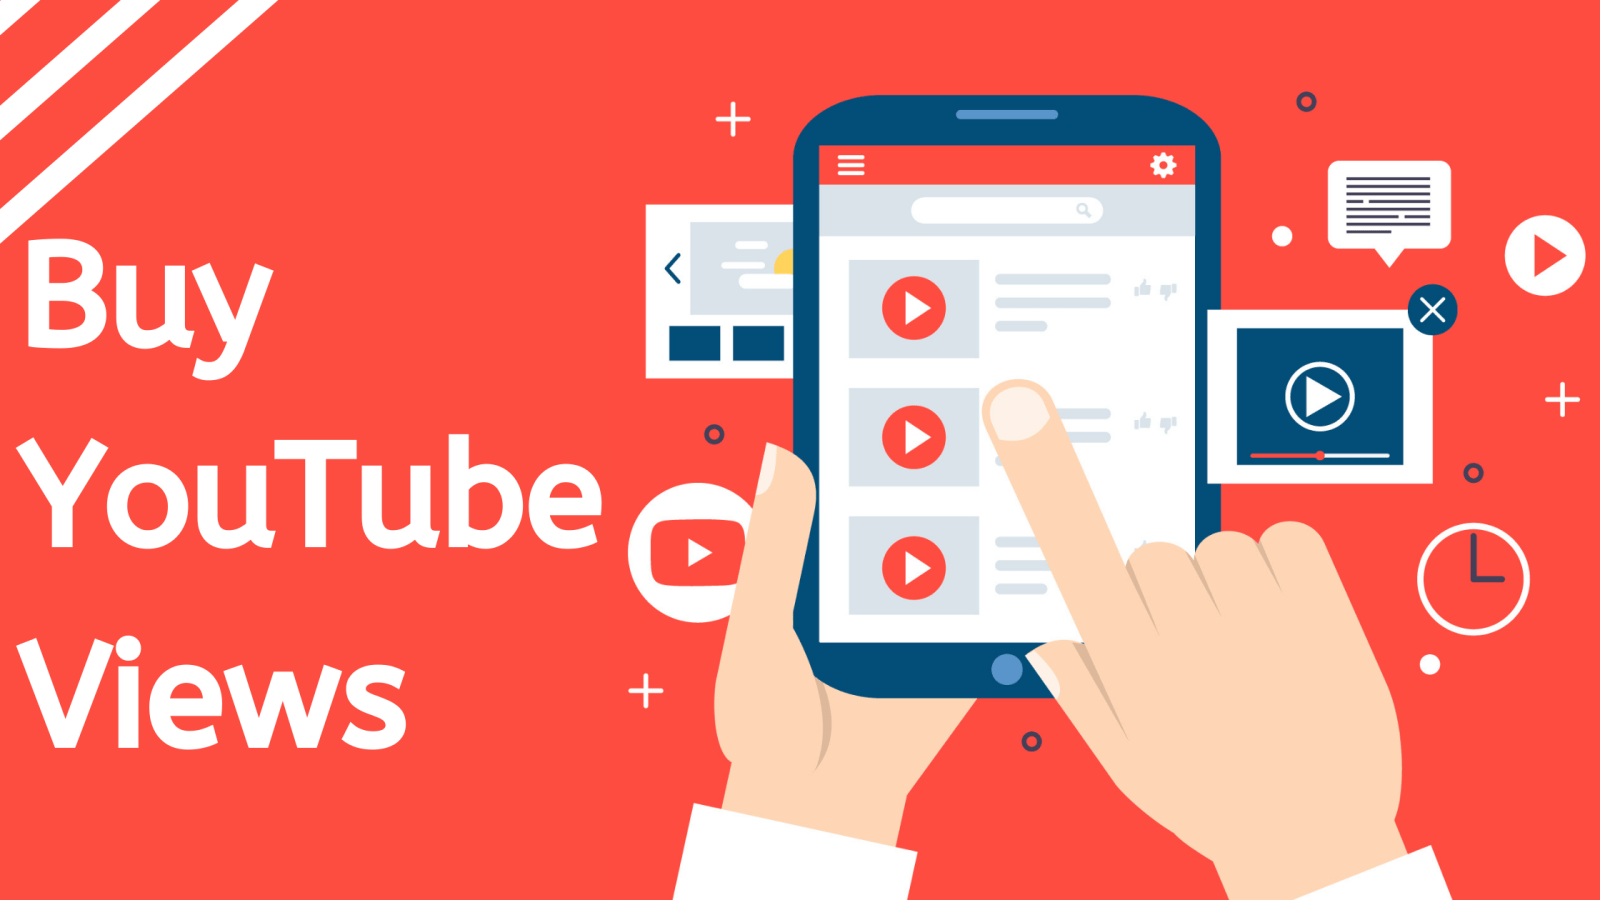 24 Best Sites to Buy YouTube Views in 2022: Details